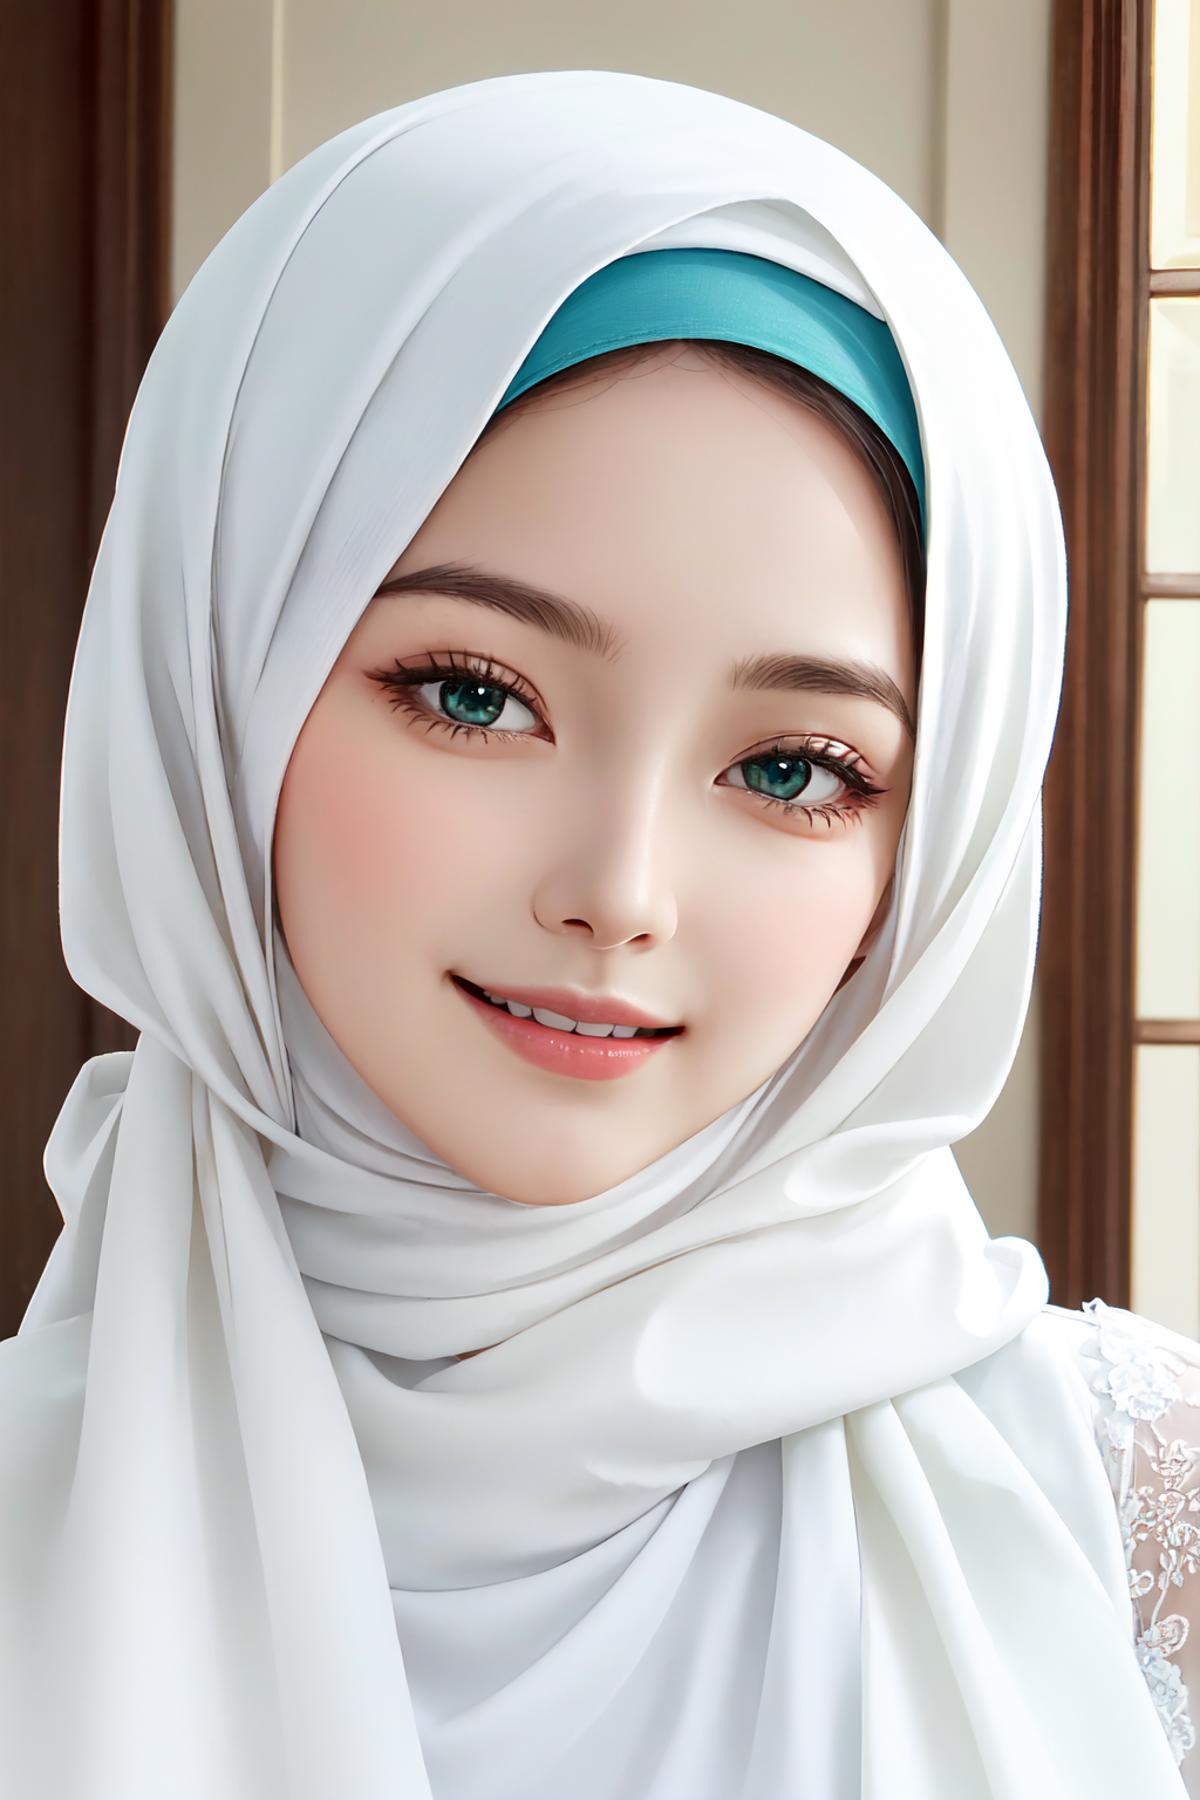 tunning photo of the most beautiful young woman in the world, green eyes, European, wearing a white hijab, mouth slightly ...